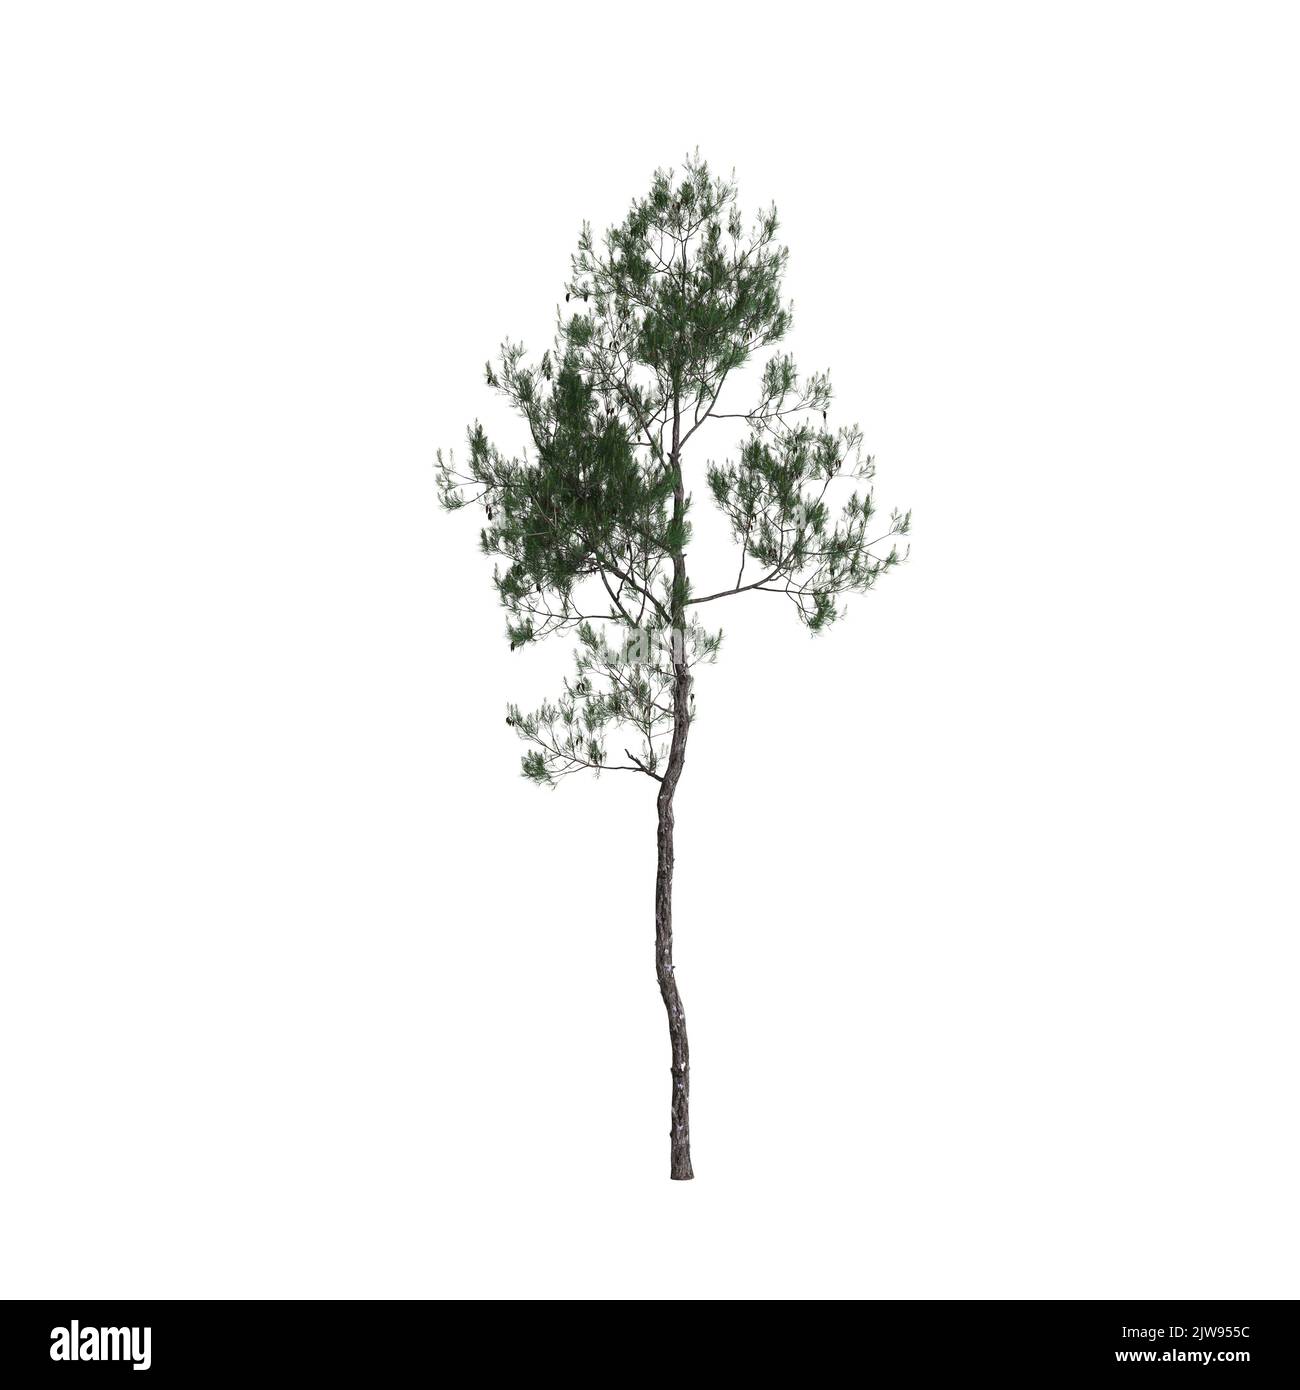 3d illustration of pinus dalatensis tree isolated on white background Stock Photo